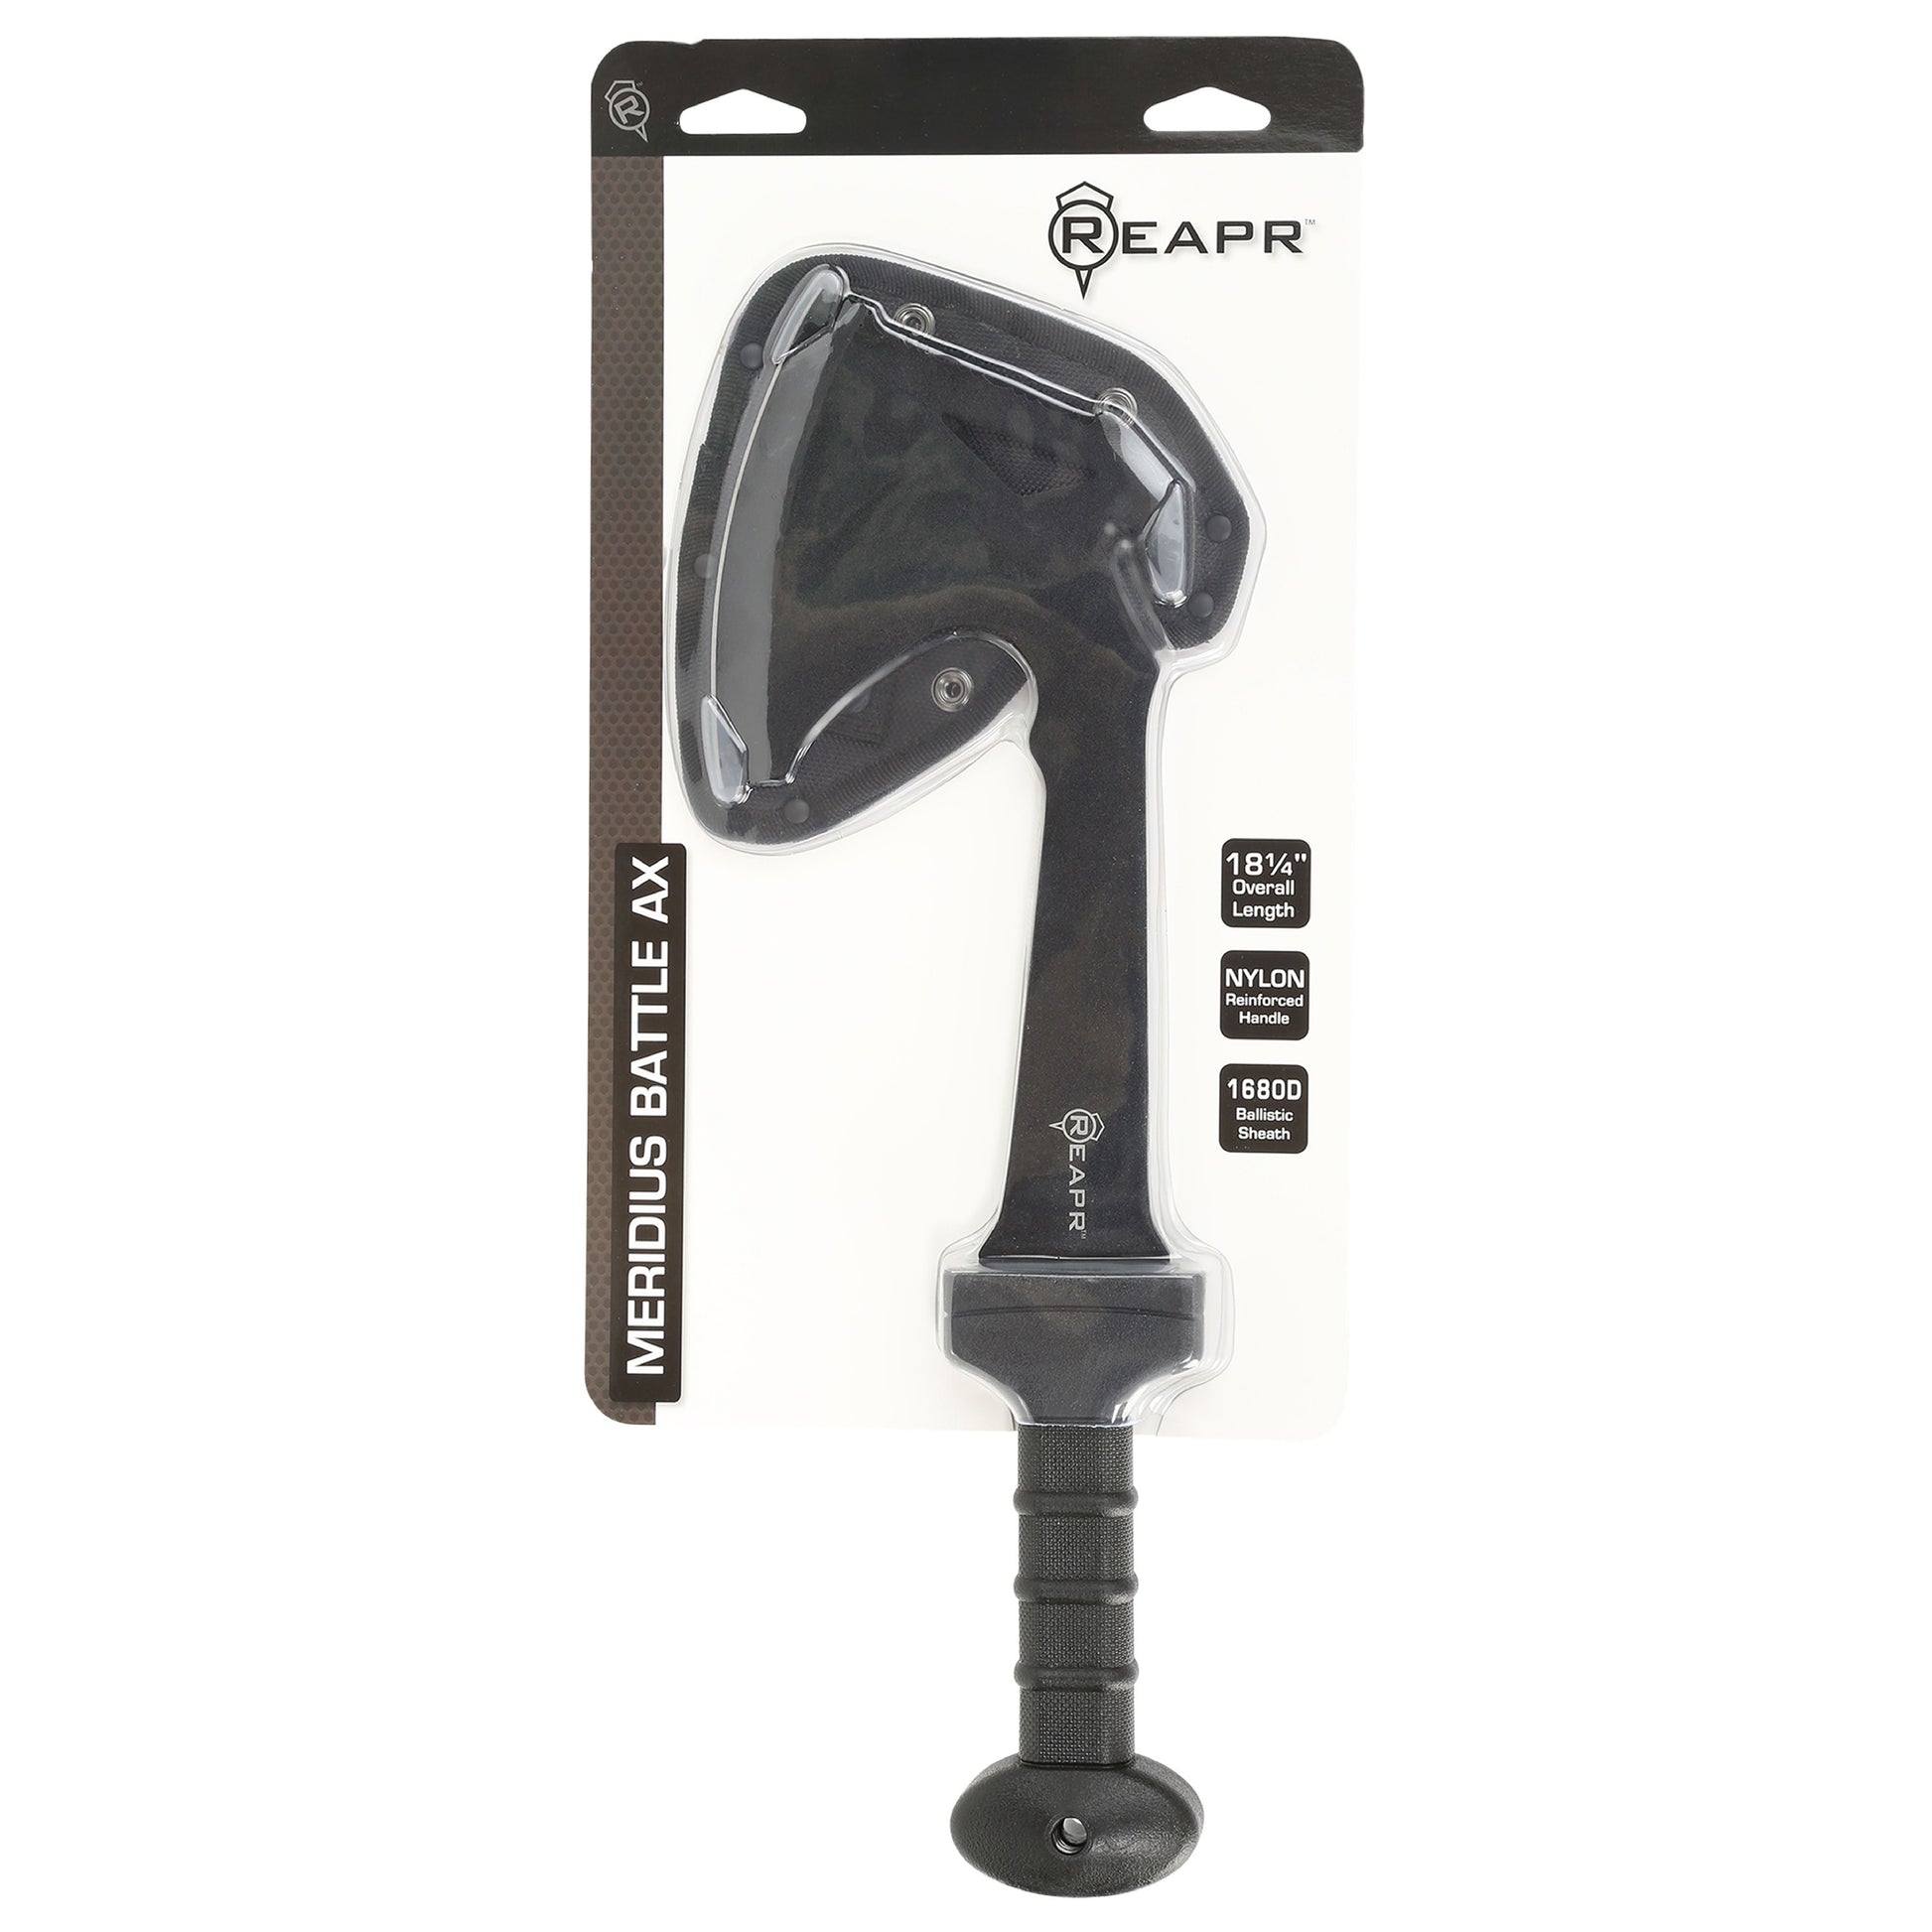 REAPR 11020 Meridius metal battle axe for chopping branches, ripping cloth or fabric, light sawing, and outdoor camping.